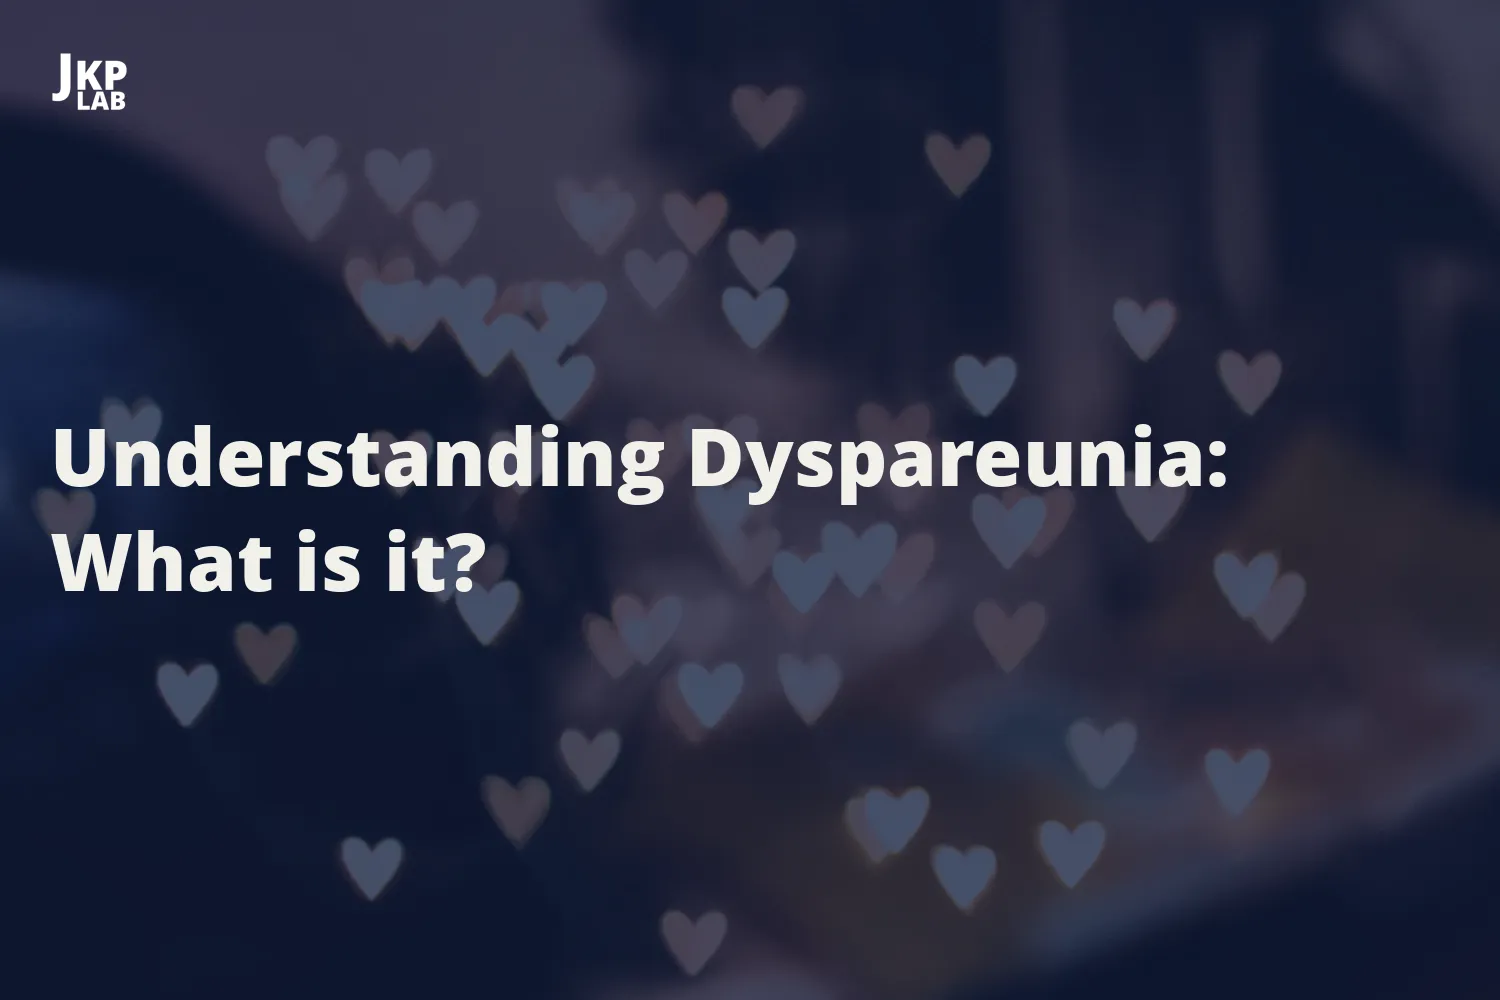 Lack of Lubrication: A Cause of Dyspareunia